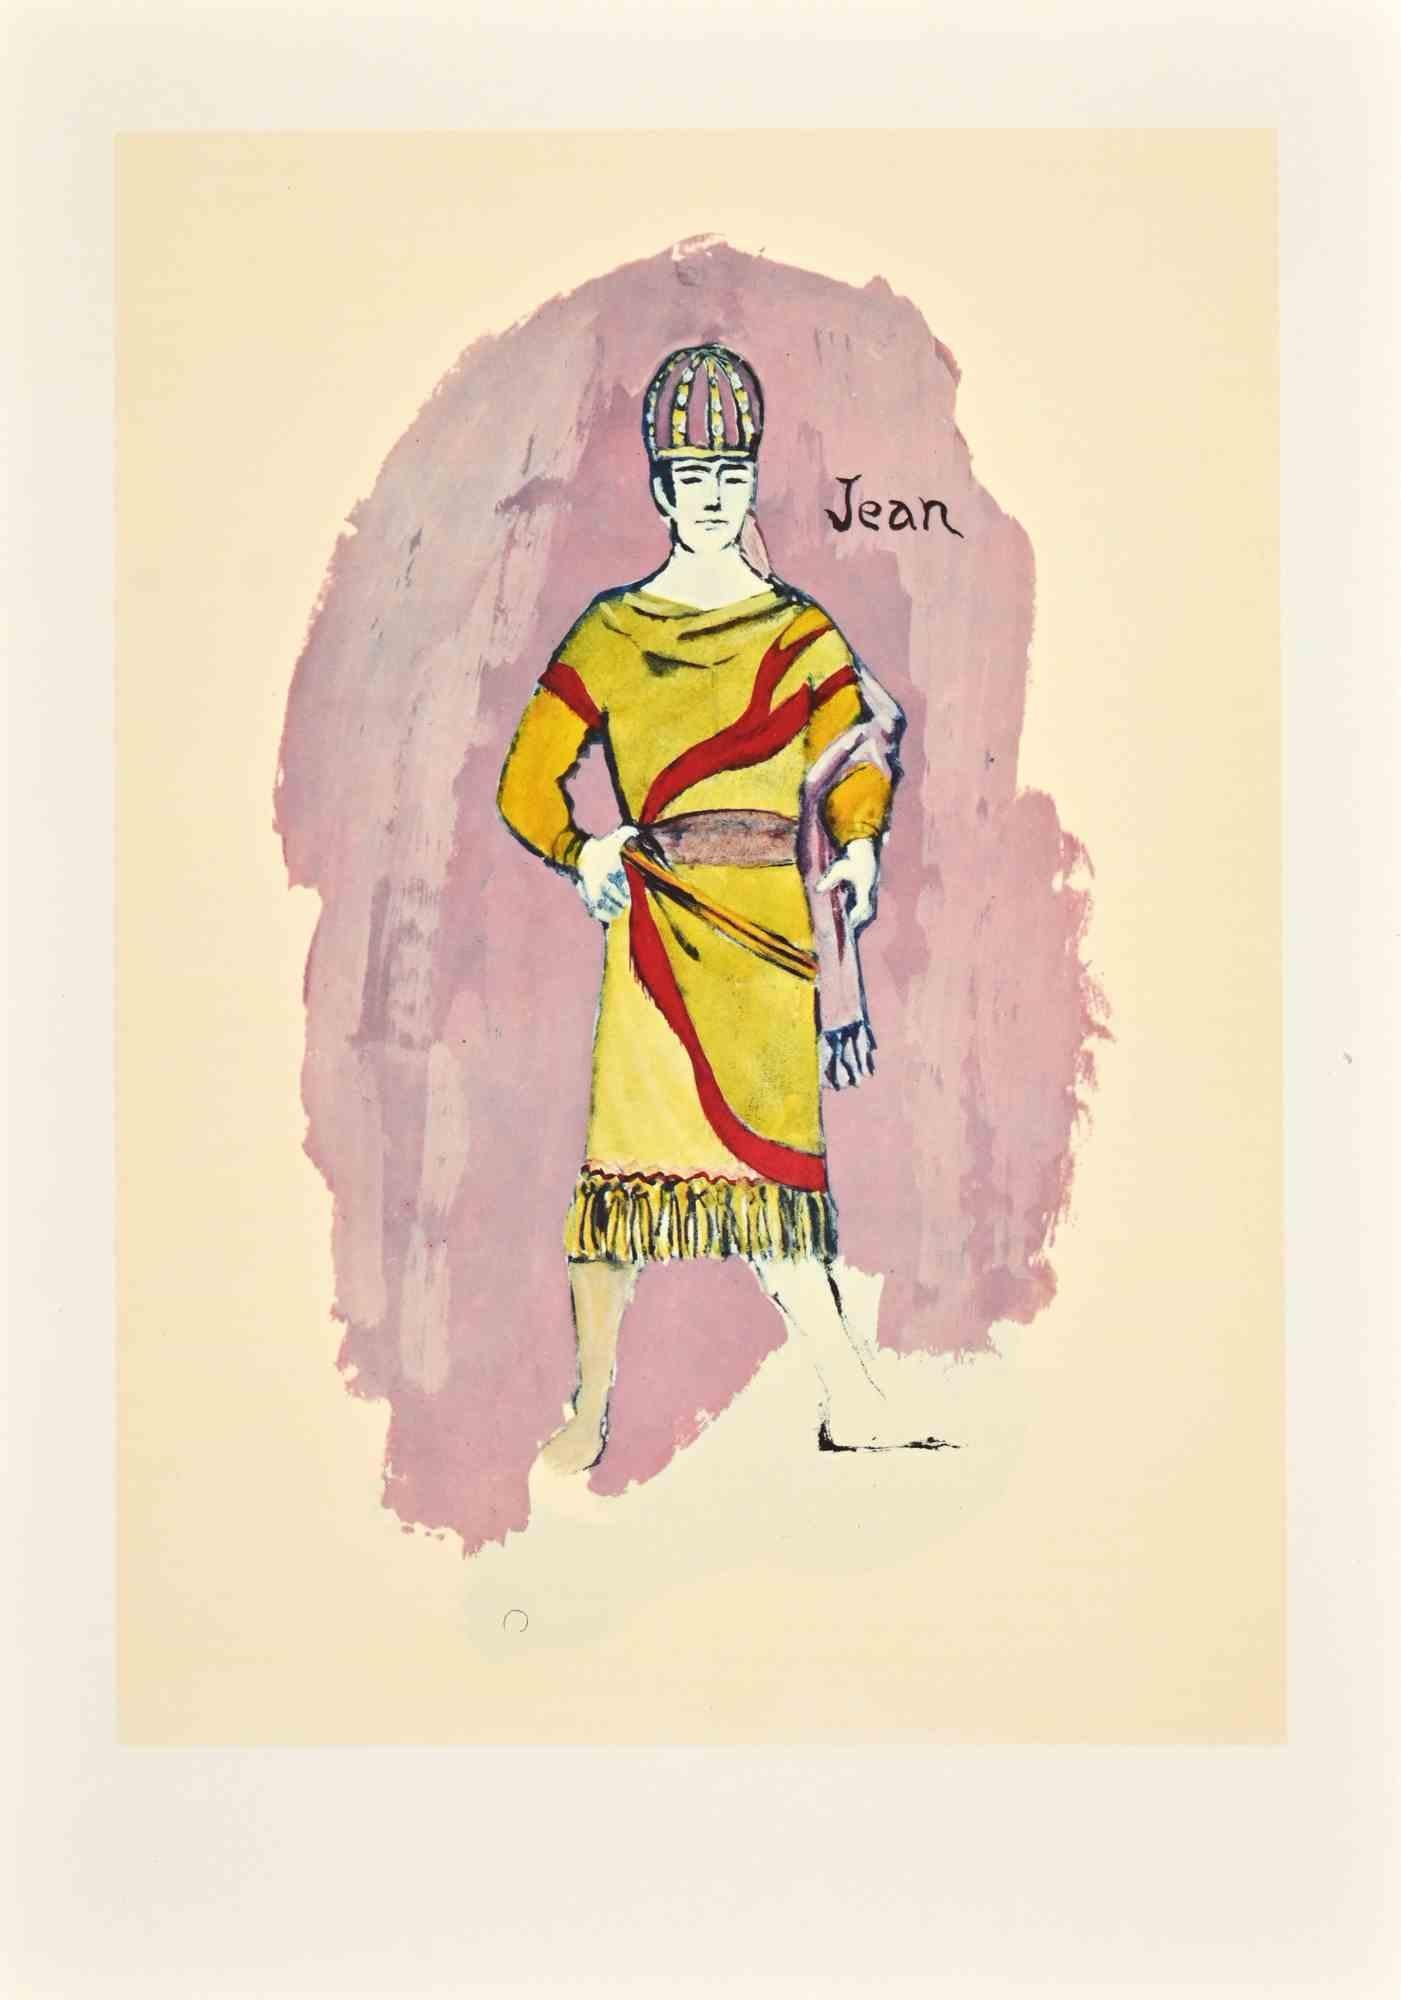 Jean - Lithograph by Dorothea Tanning - 1972